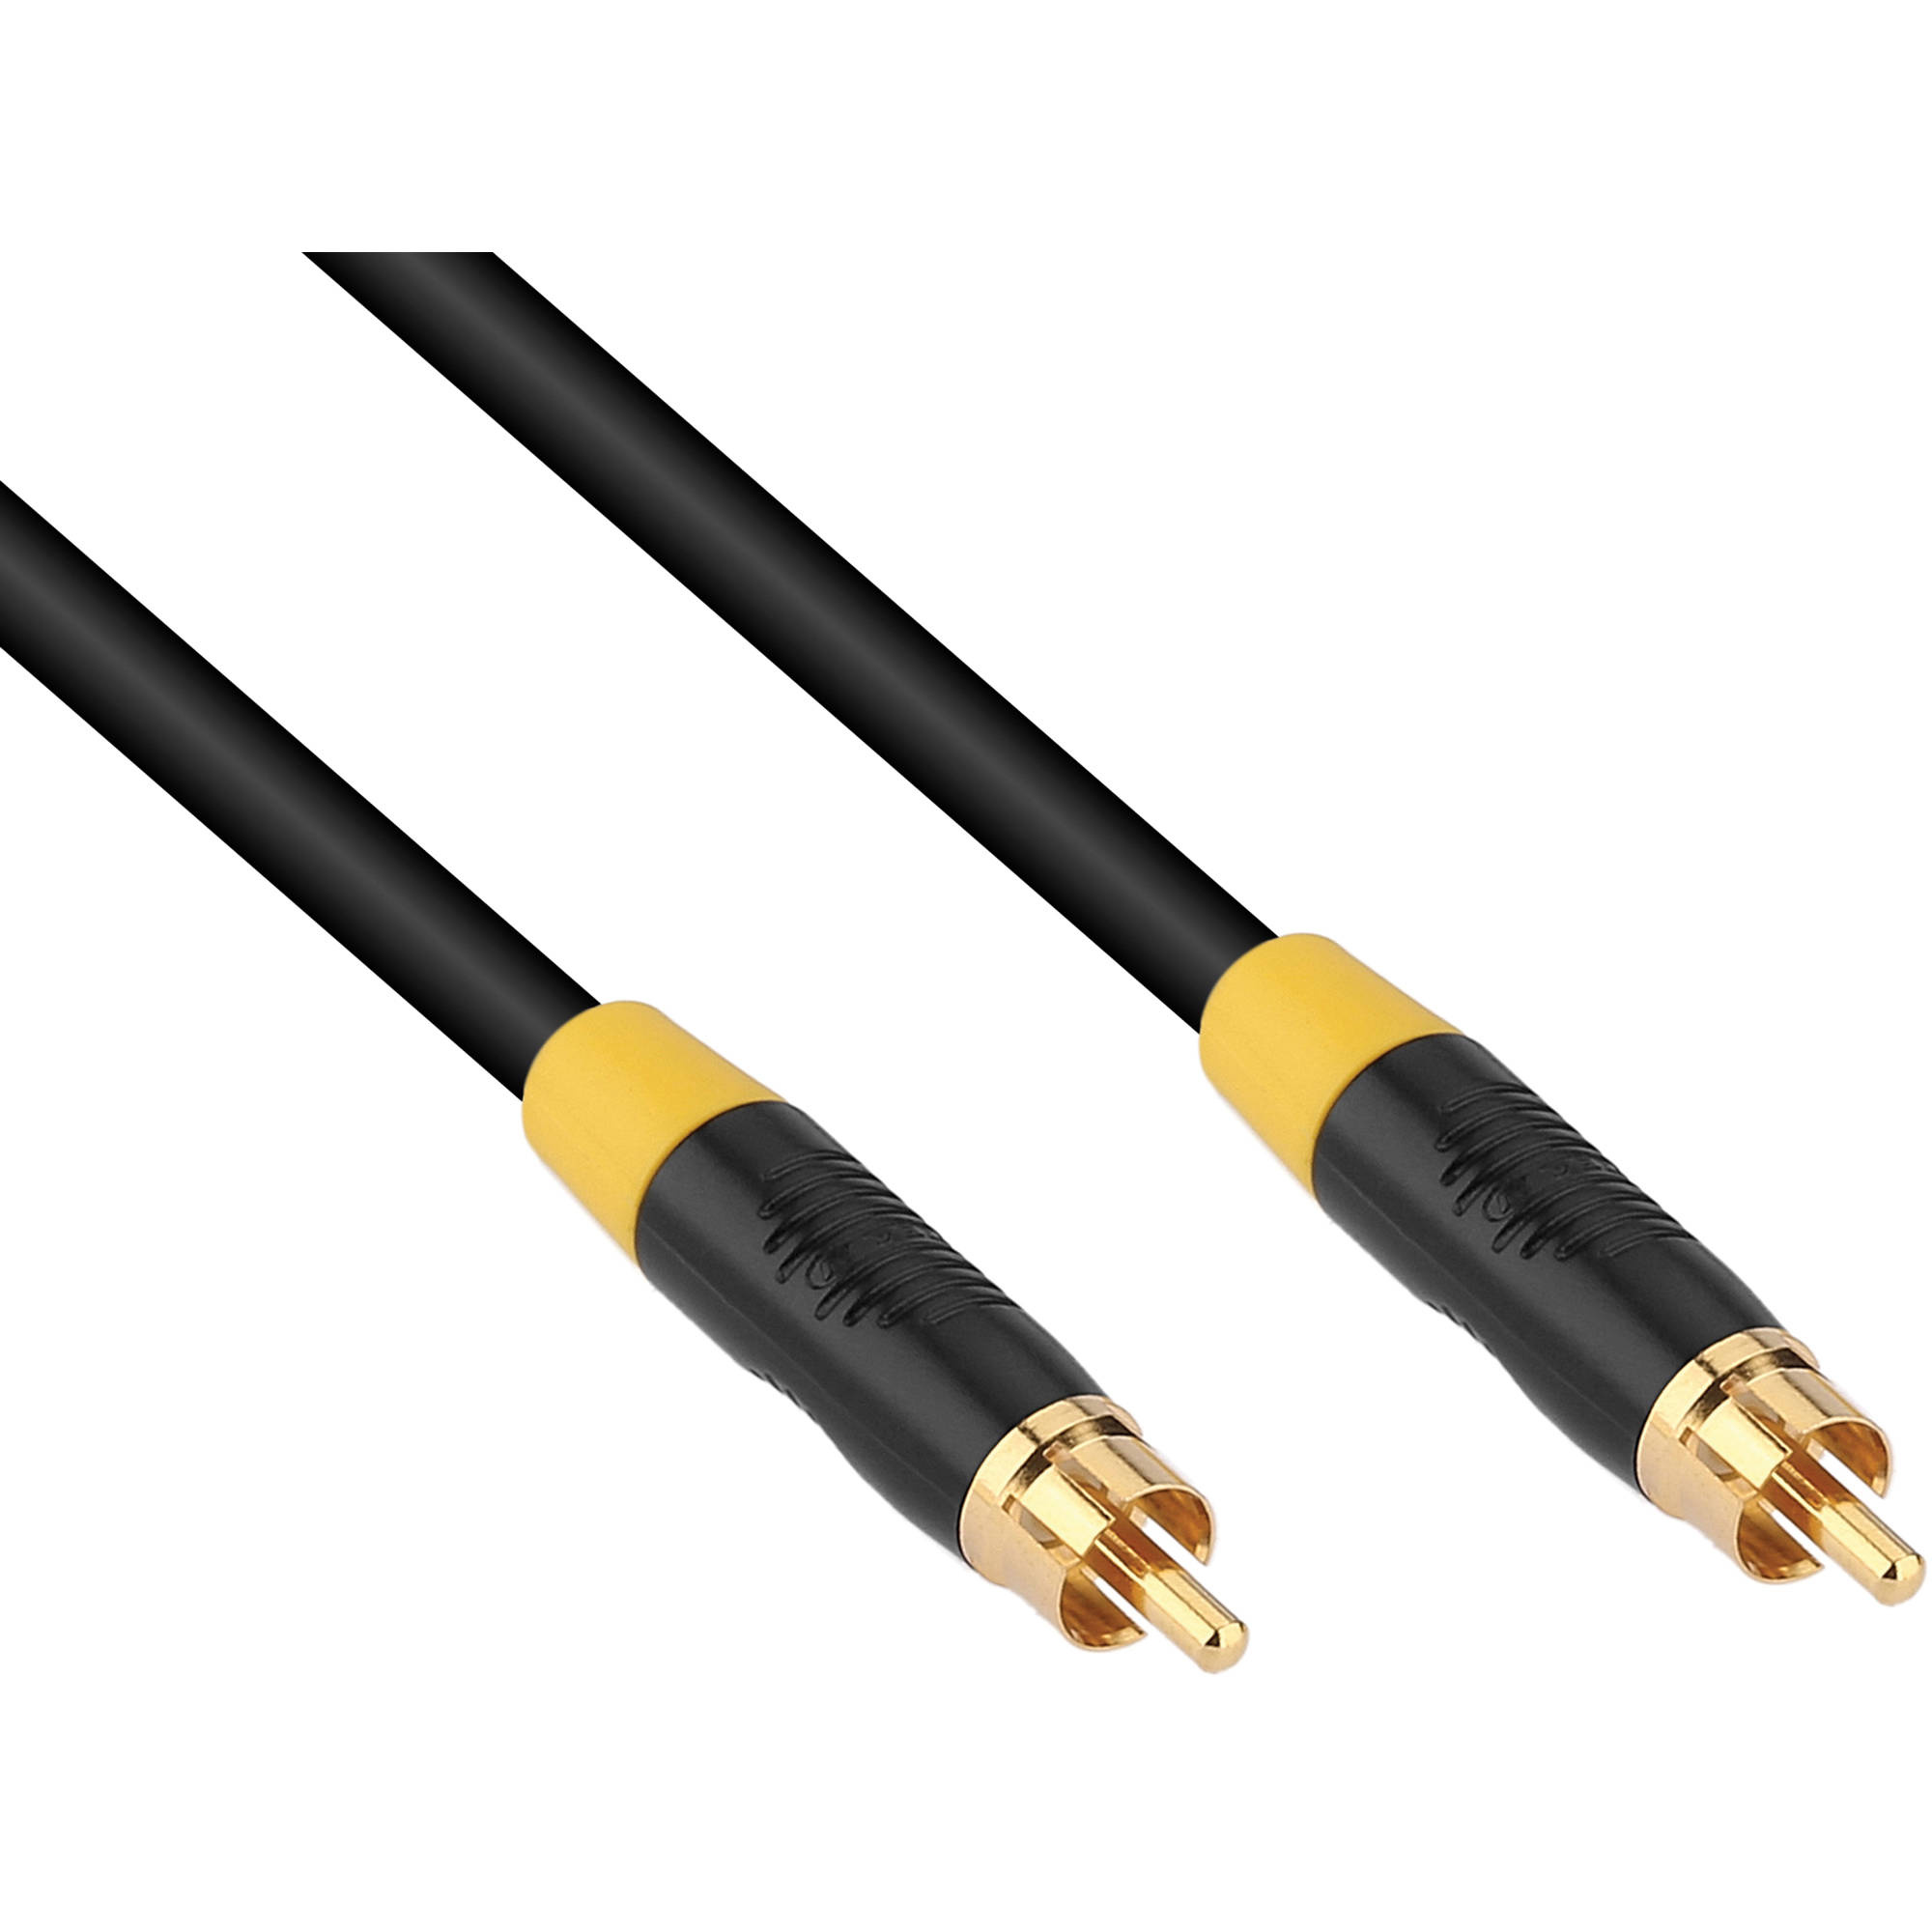 Kopul Premium Series RCA Male to RCA Male Cable (25 ft)